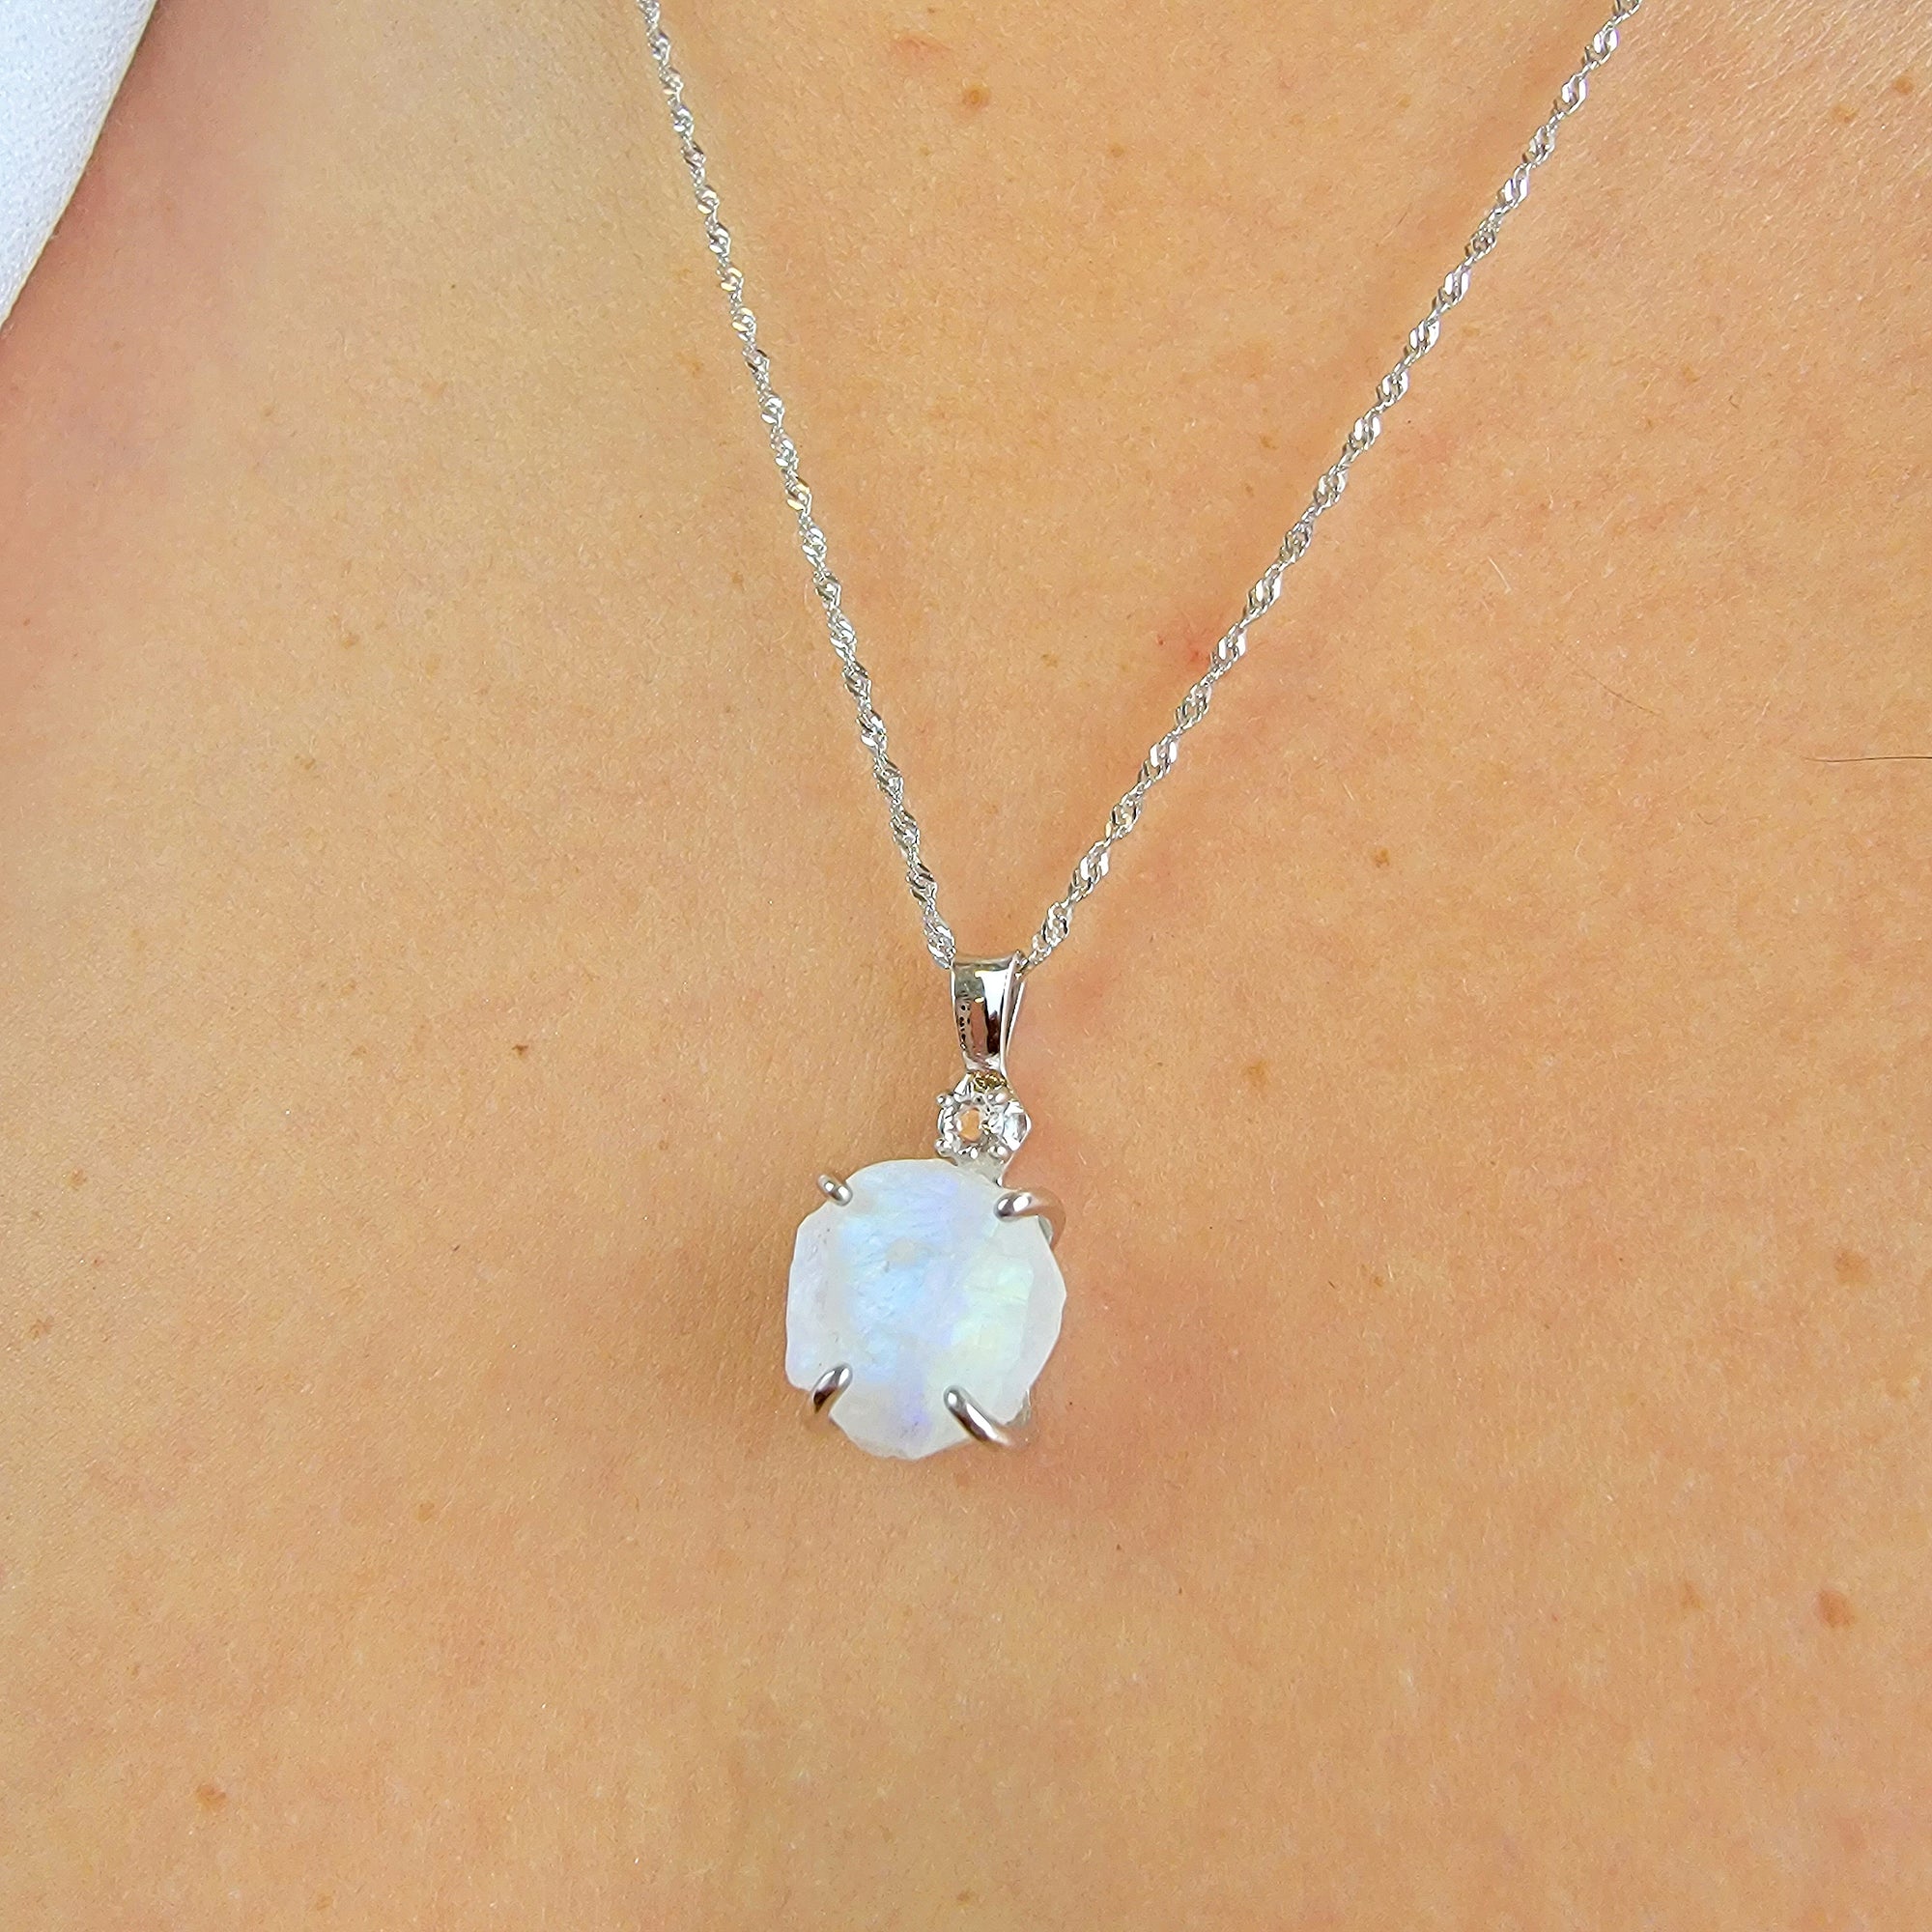 Raw Moonstone Crystal Necklace